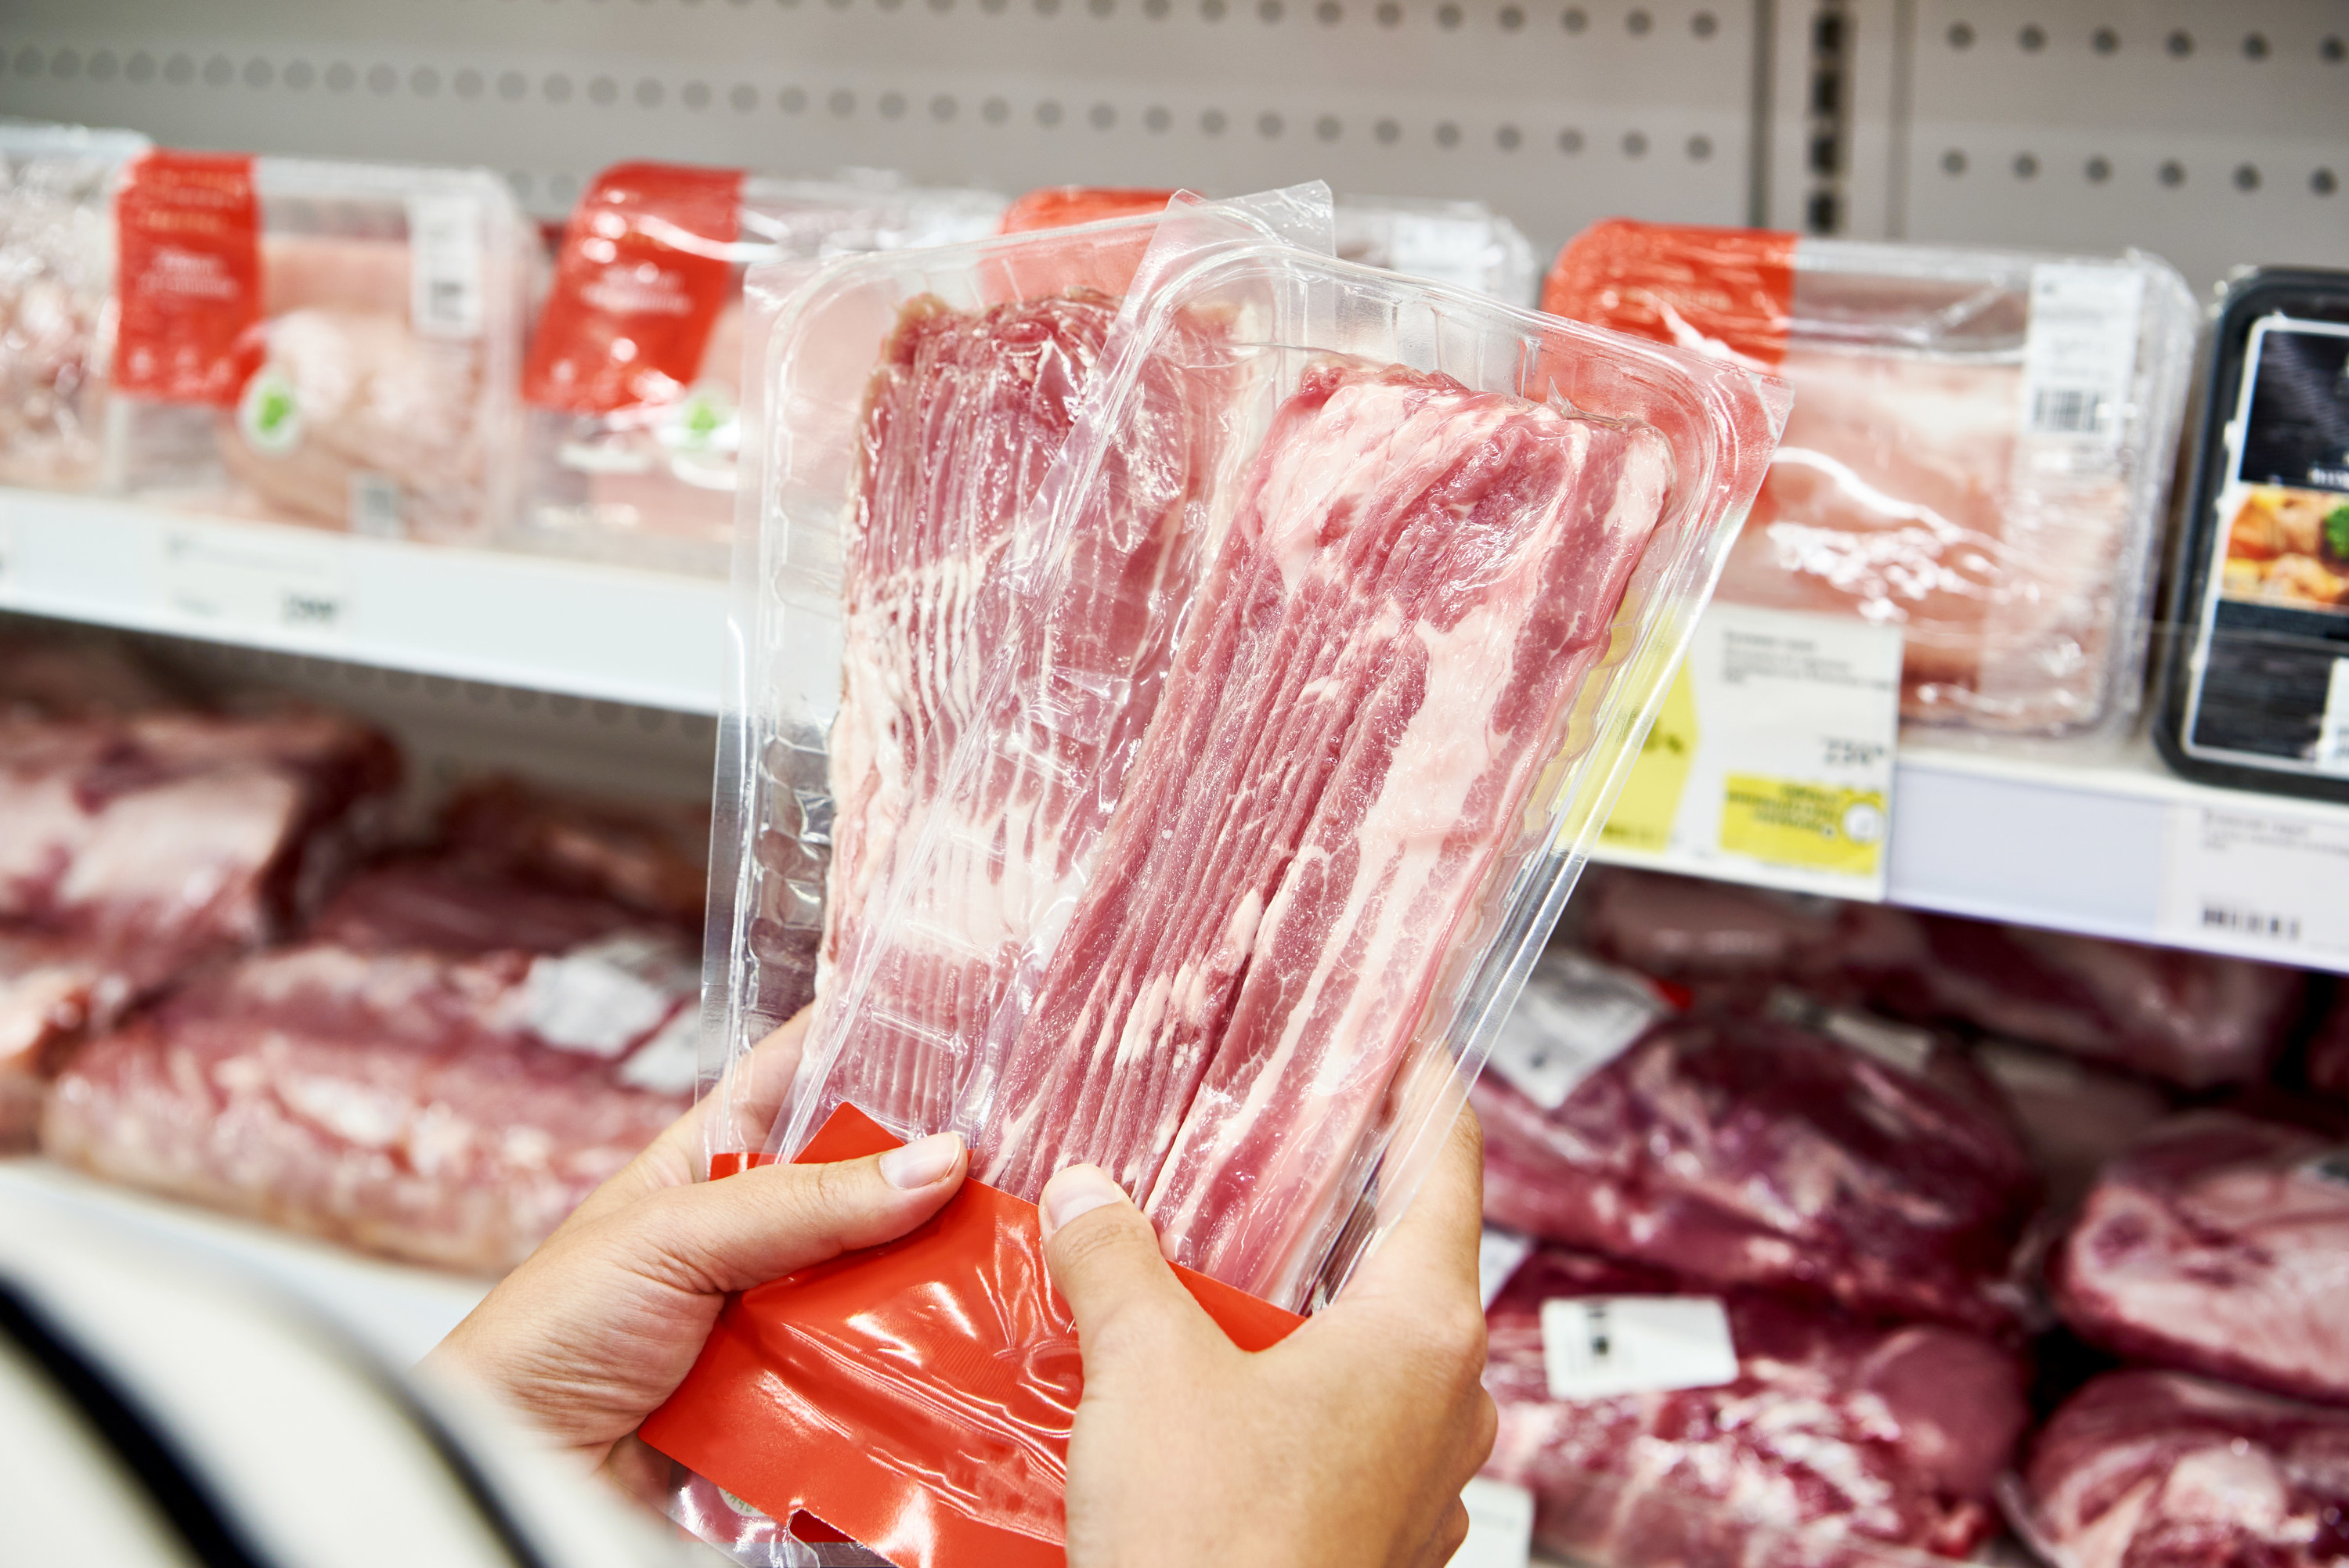 Woman chooses a slice of pork meat in vacuum package at the grocery store